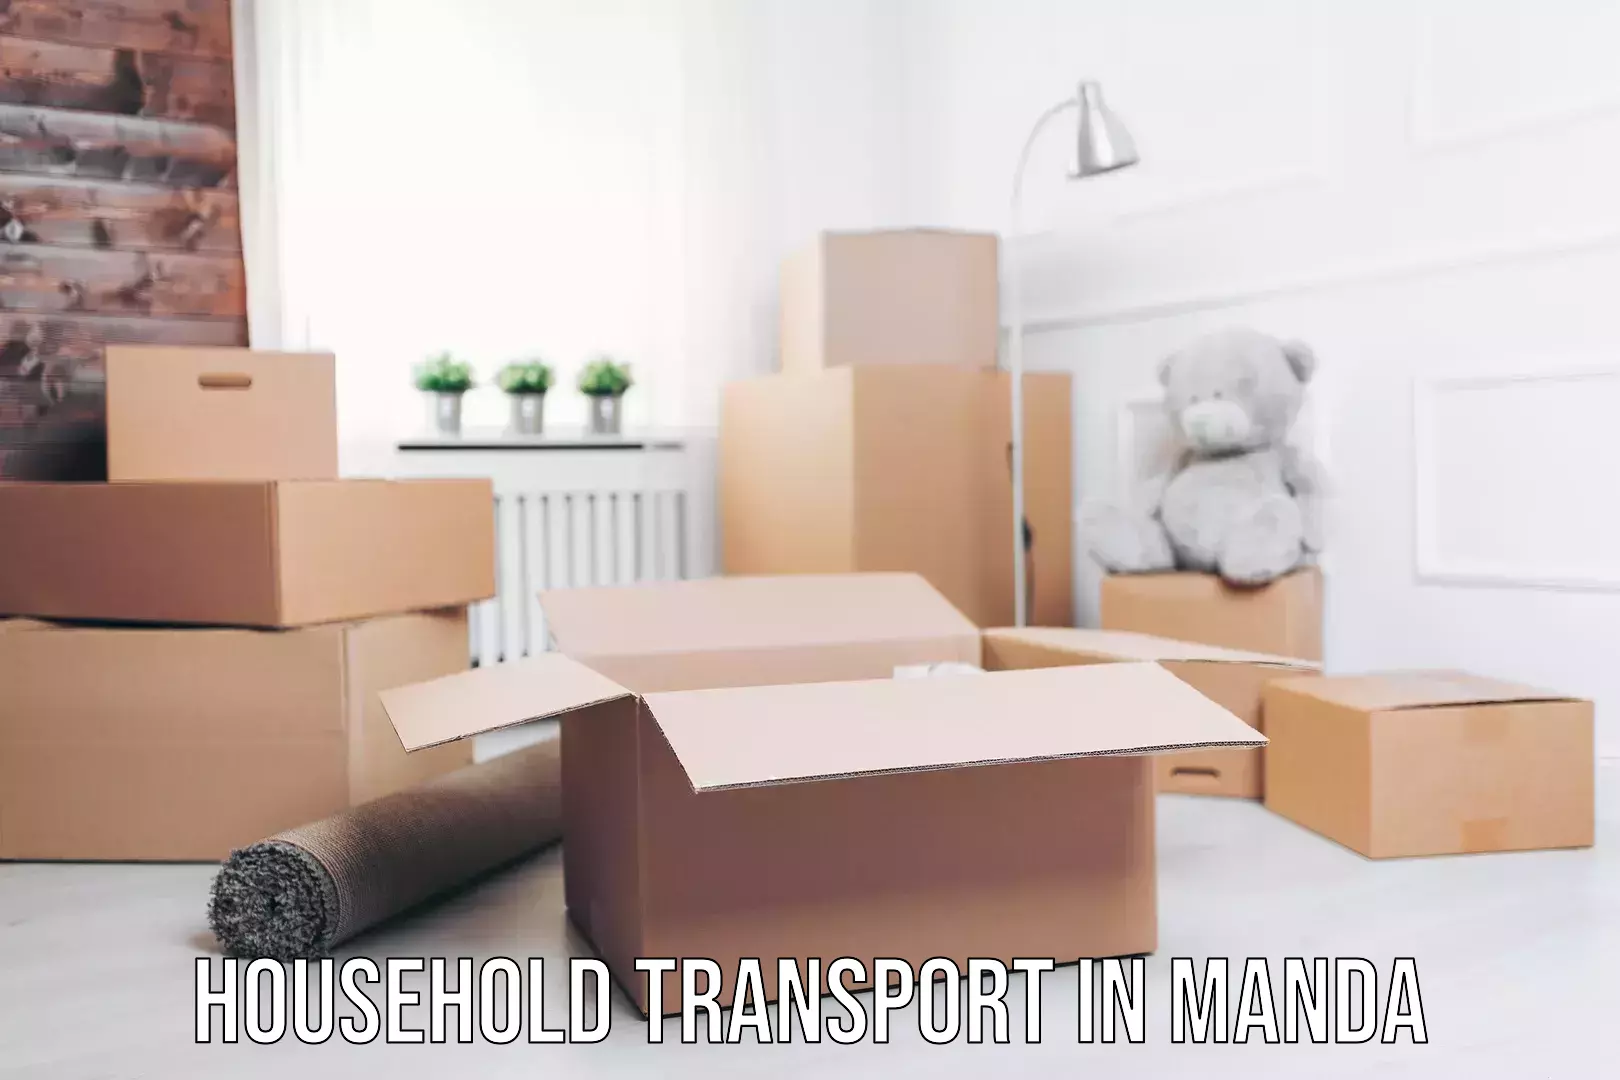 Reliable furniture movers in Manda